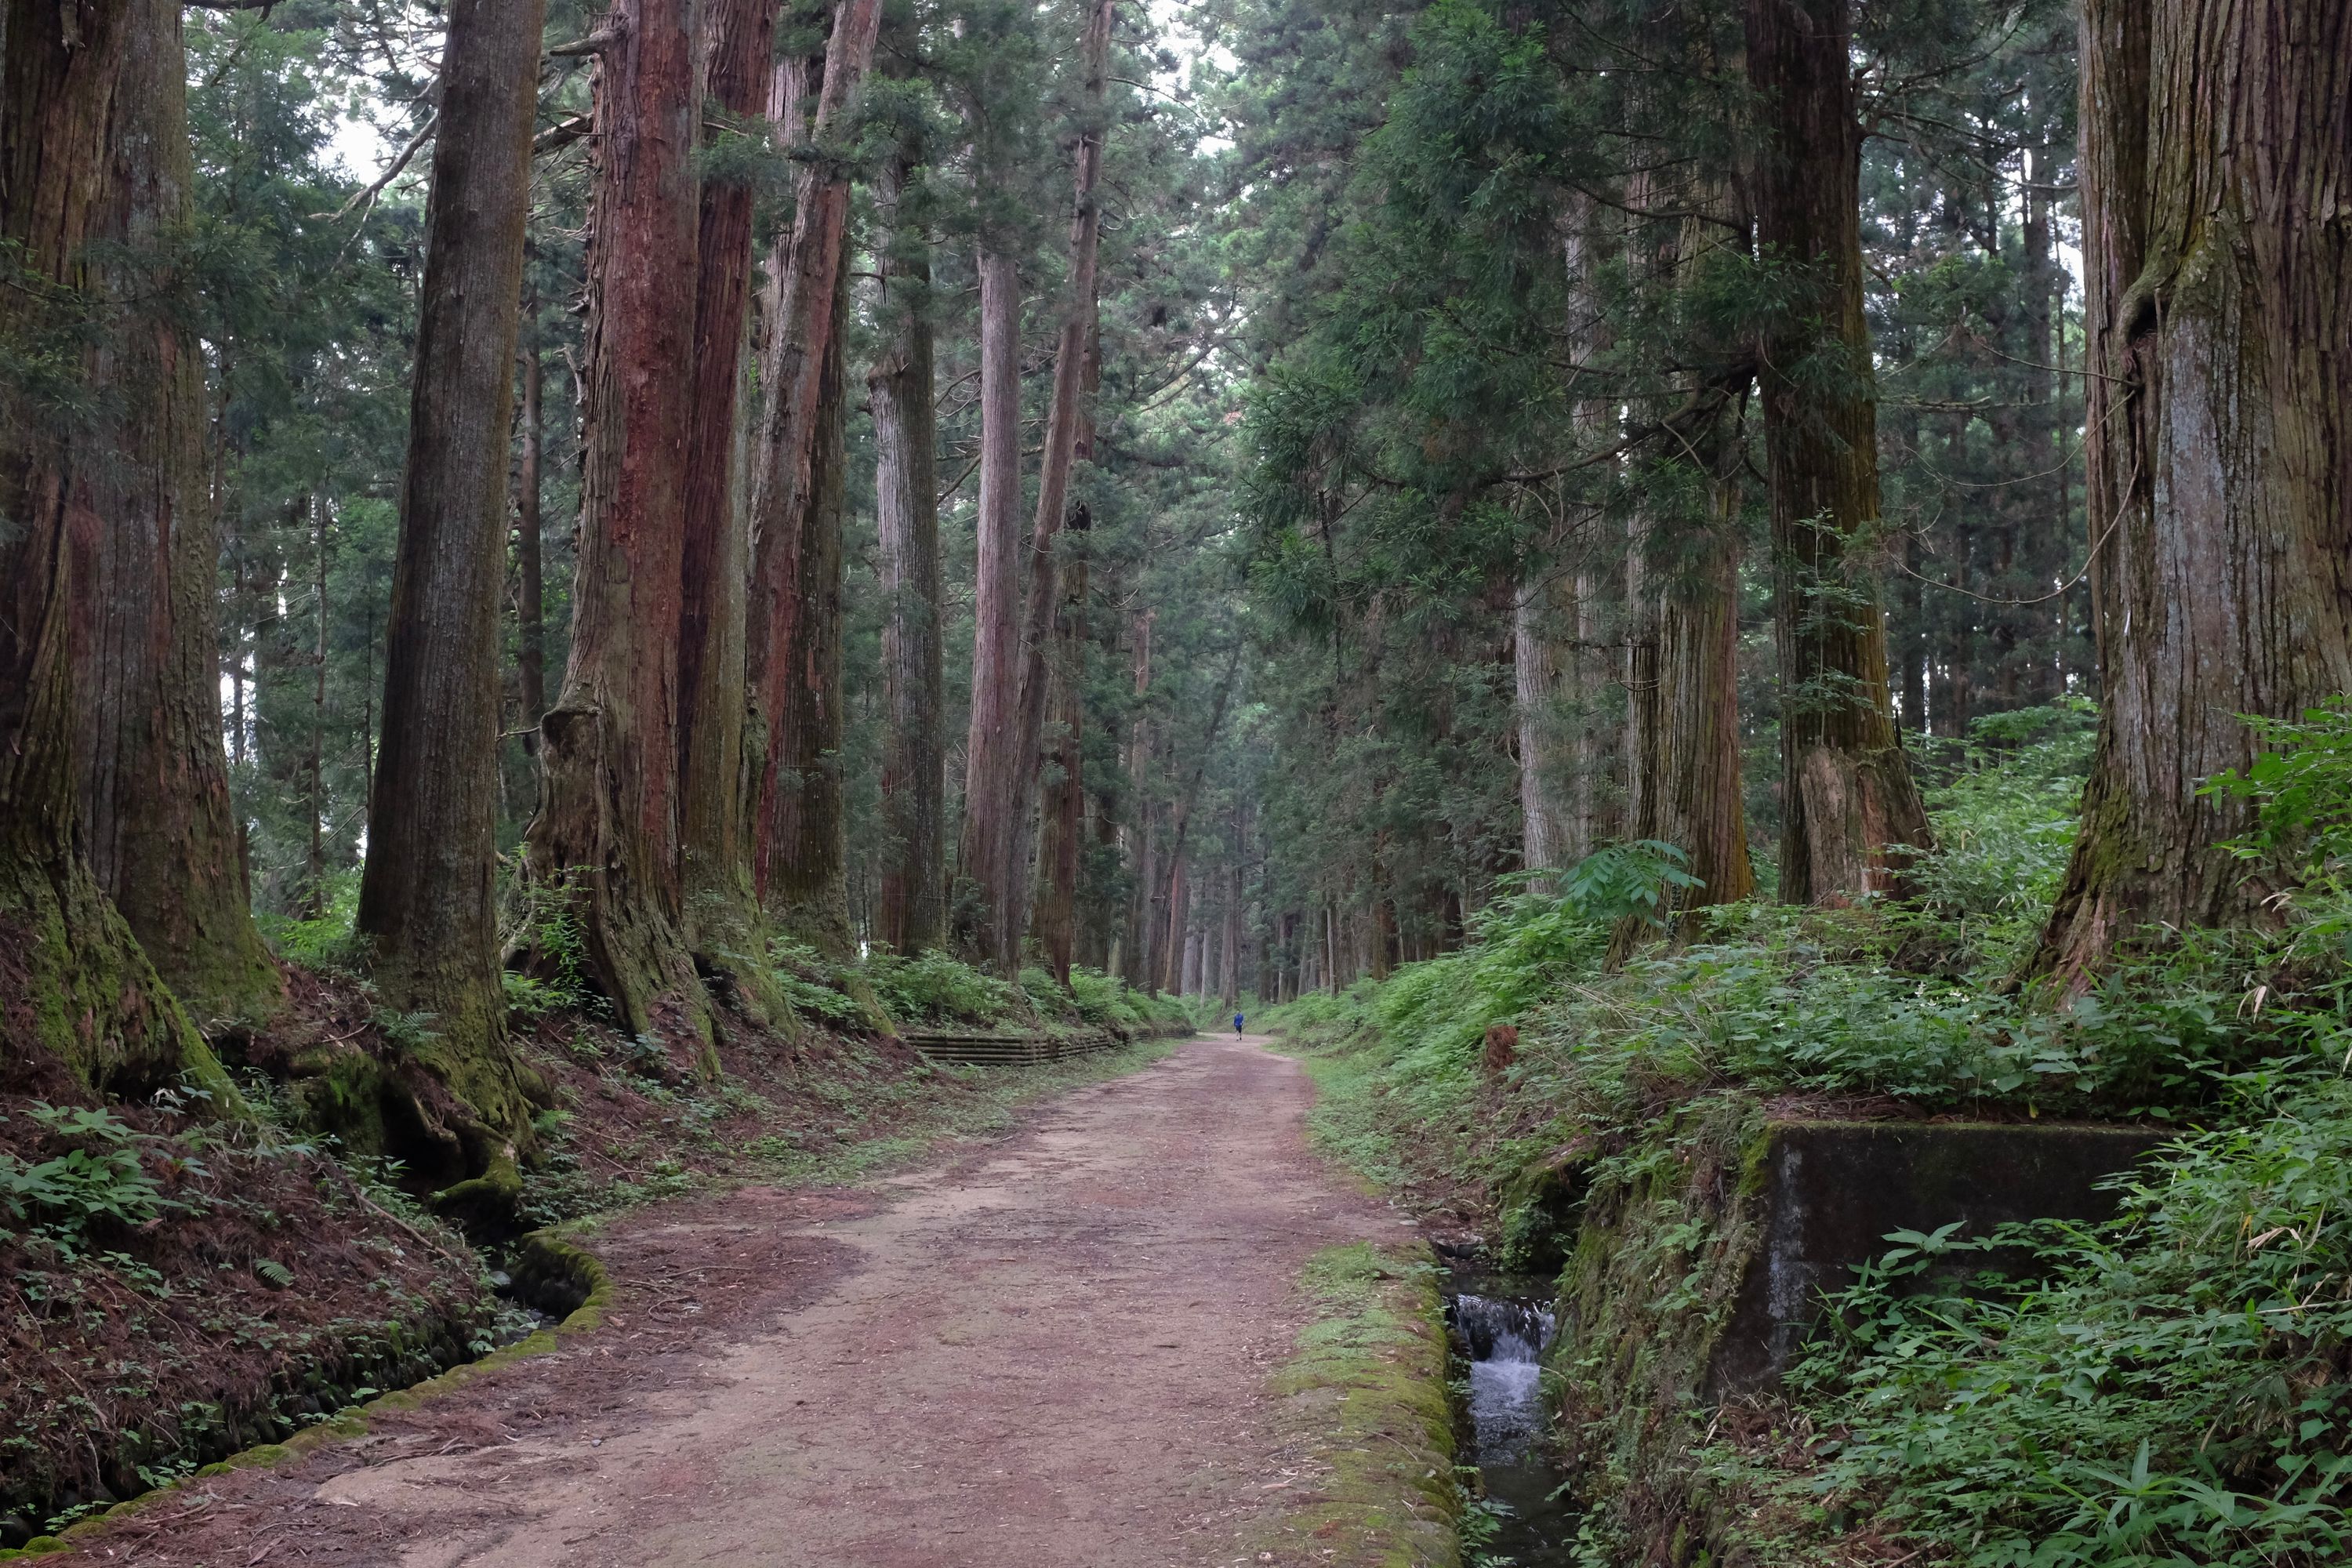 A man in the distance walks down the path between the huge cedars.